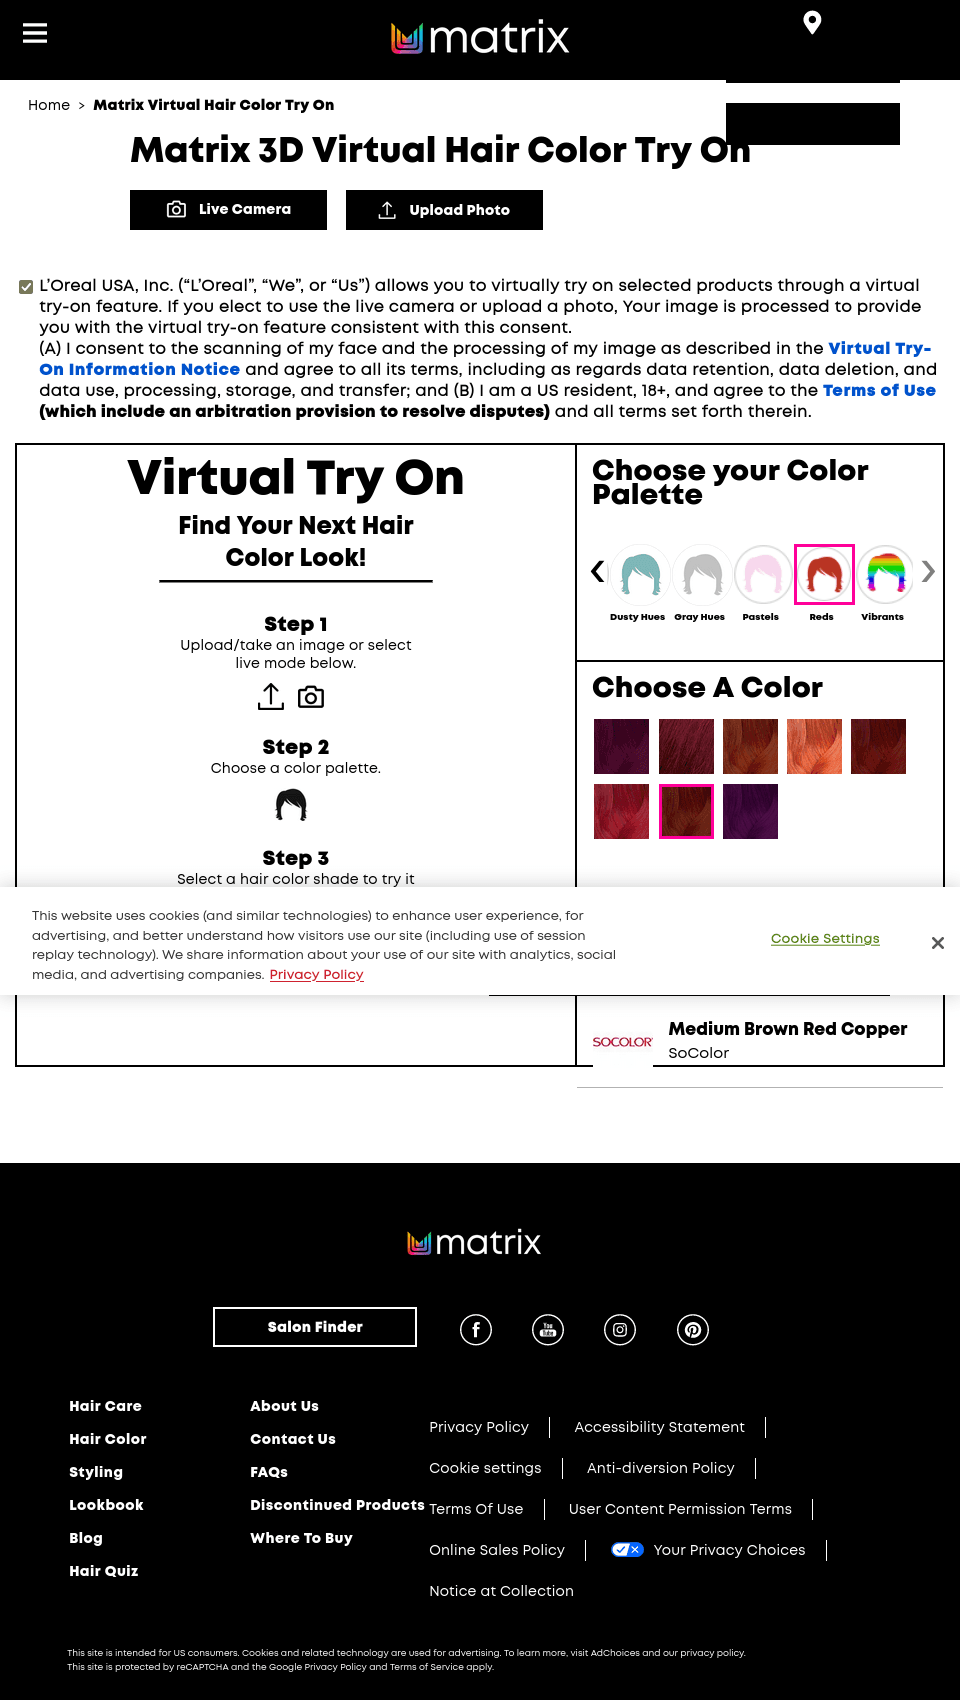 Matrix 3D Virtual Hair Color Try On - Professional Hair Color Simulator